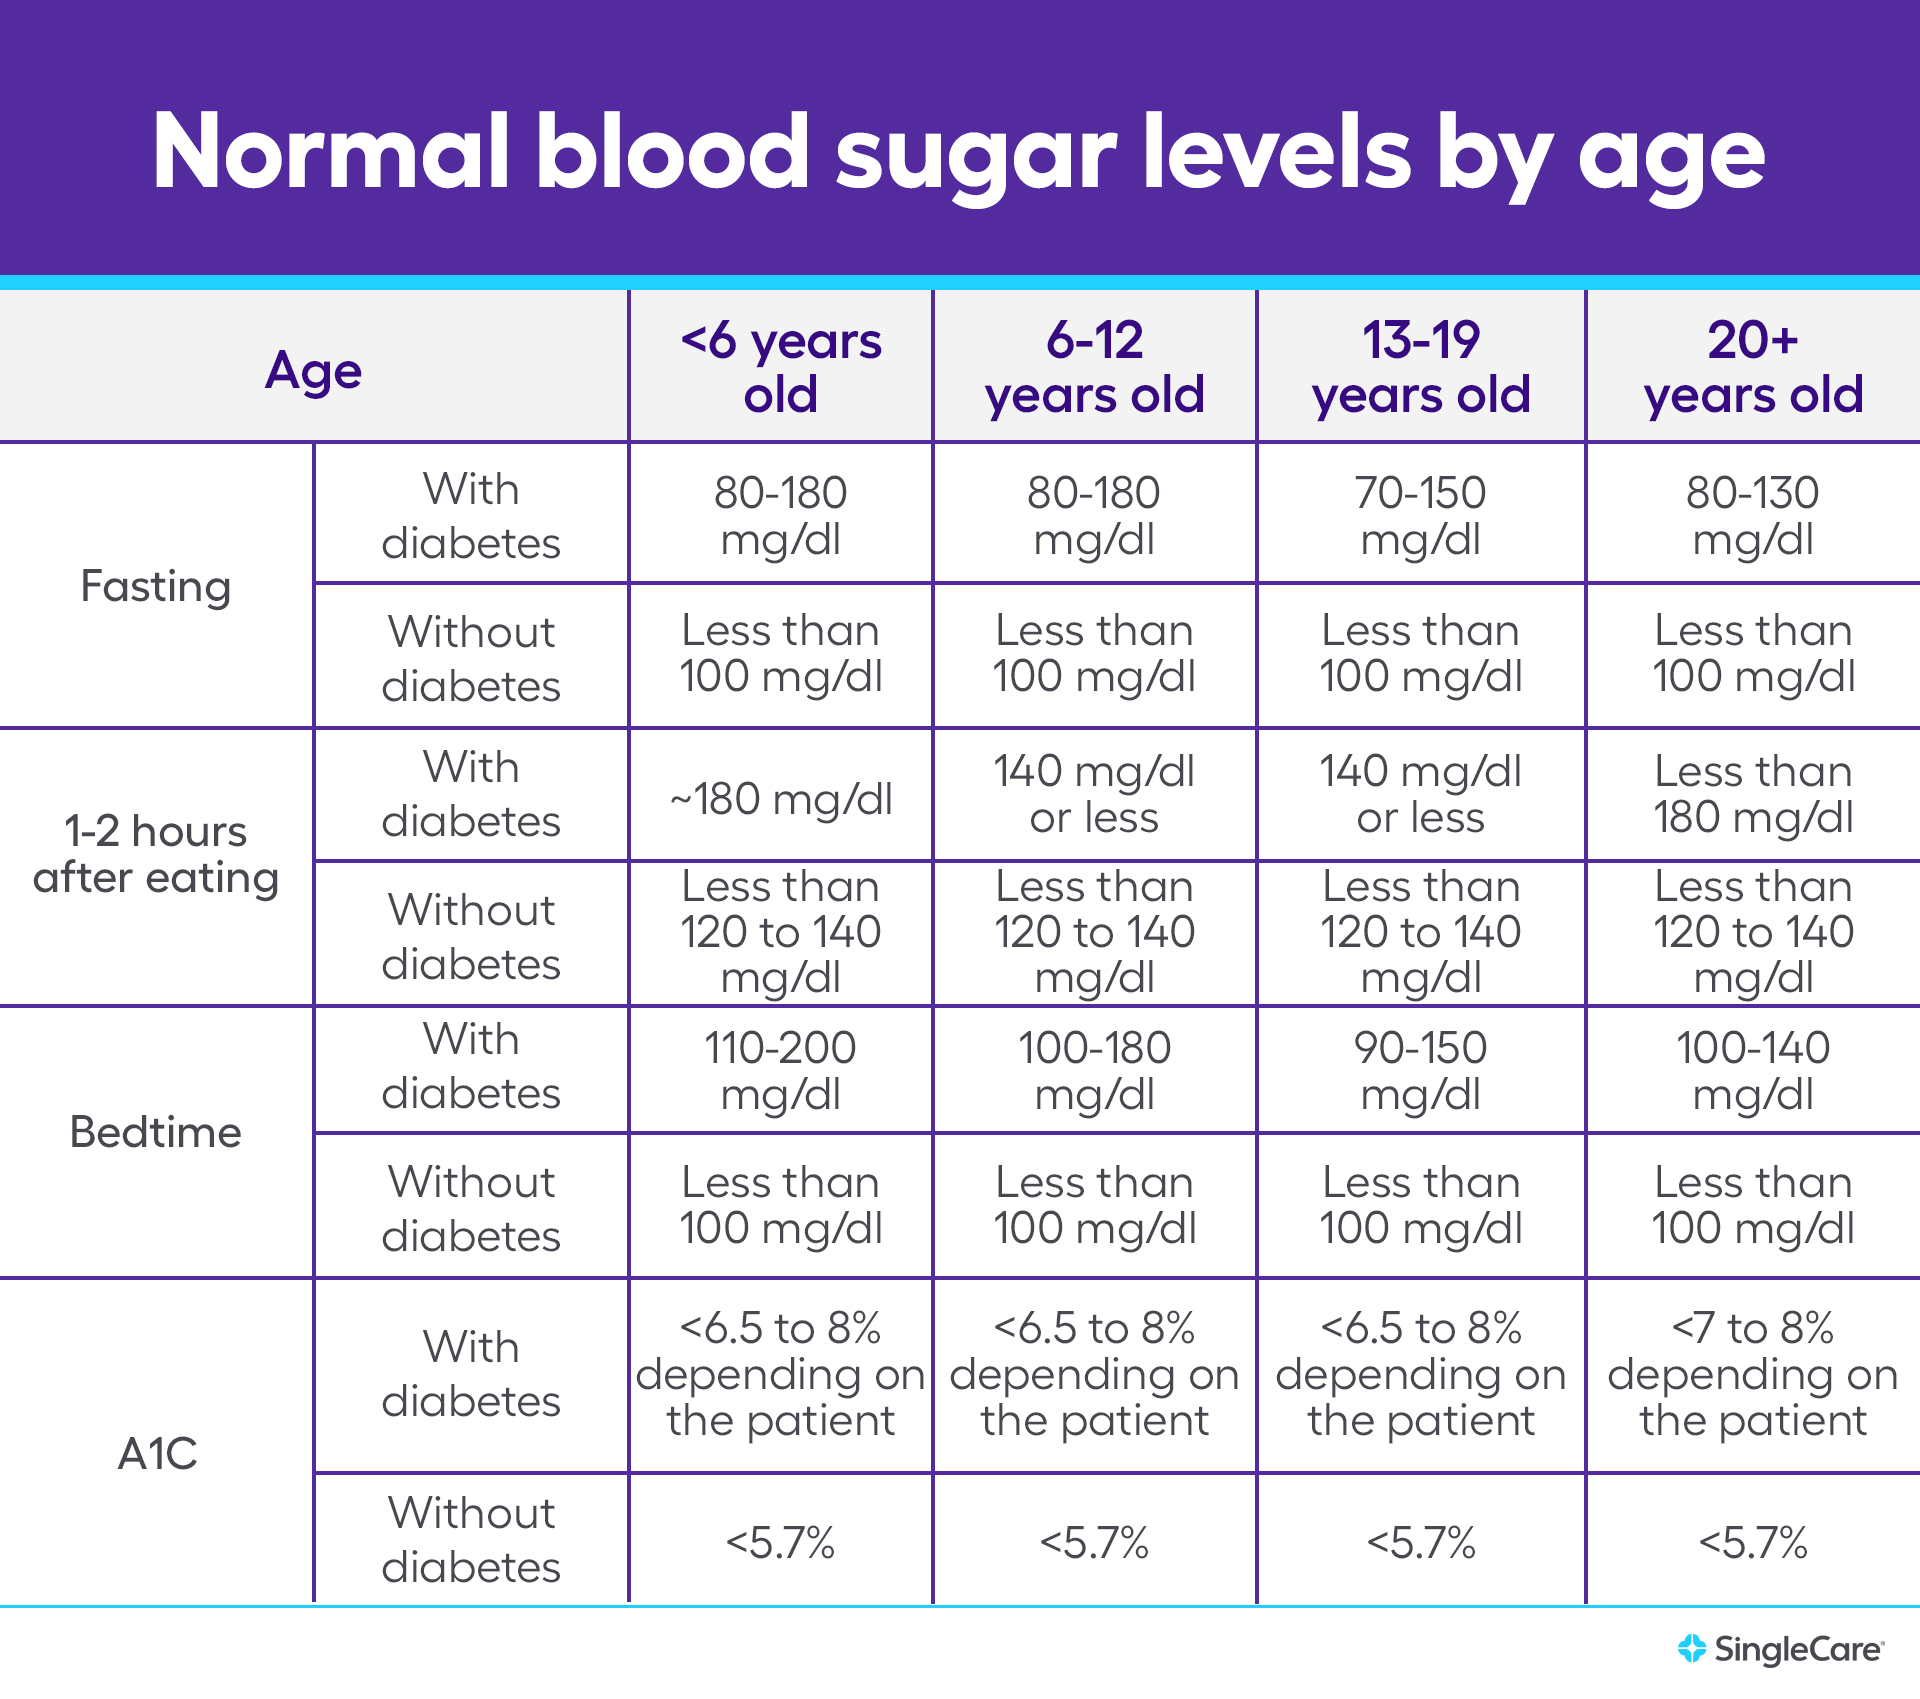 How old is the sugar?